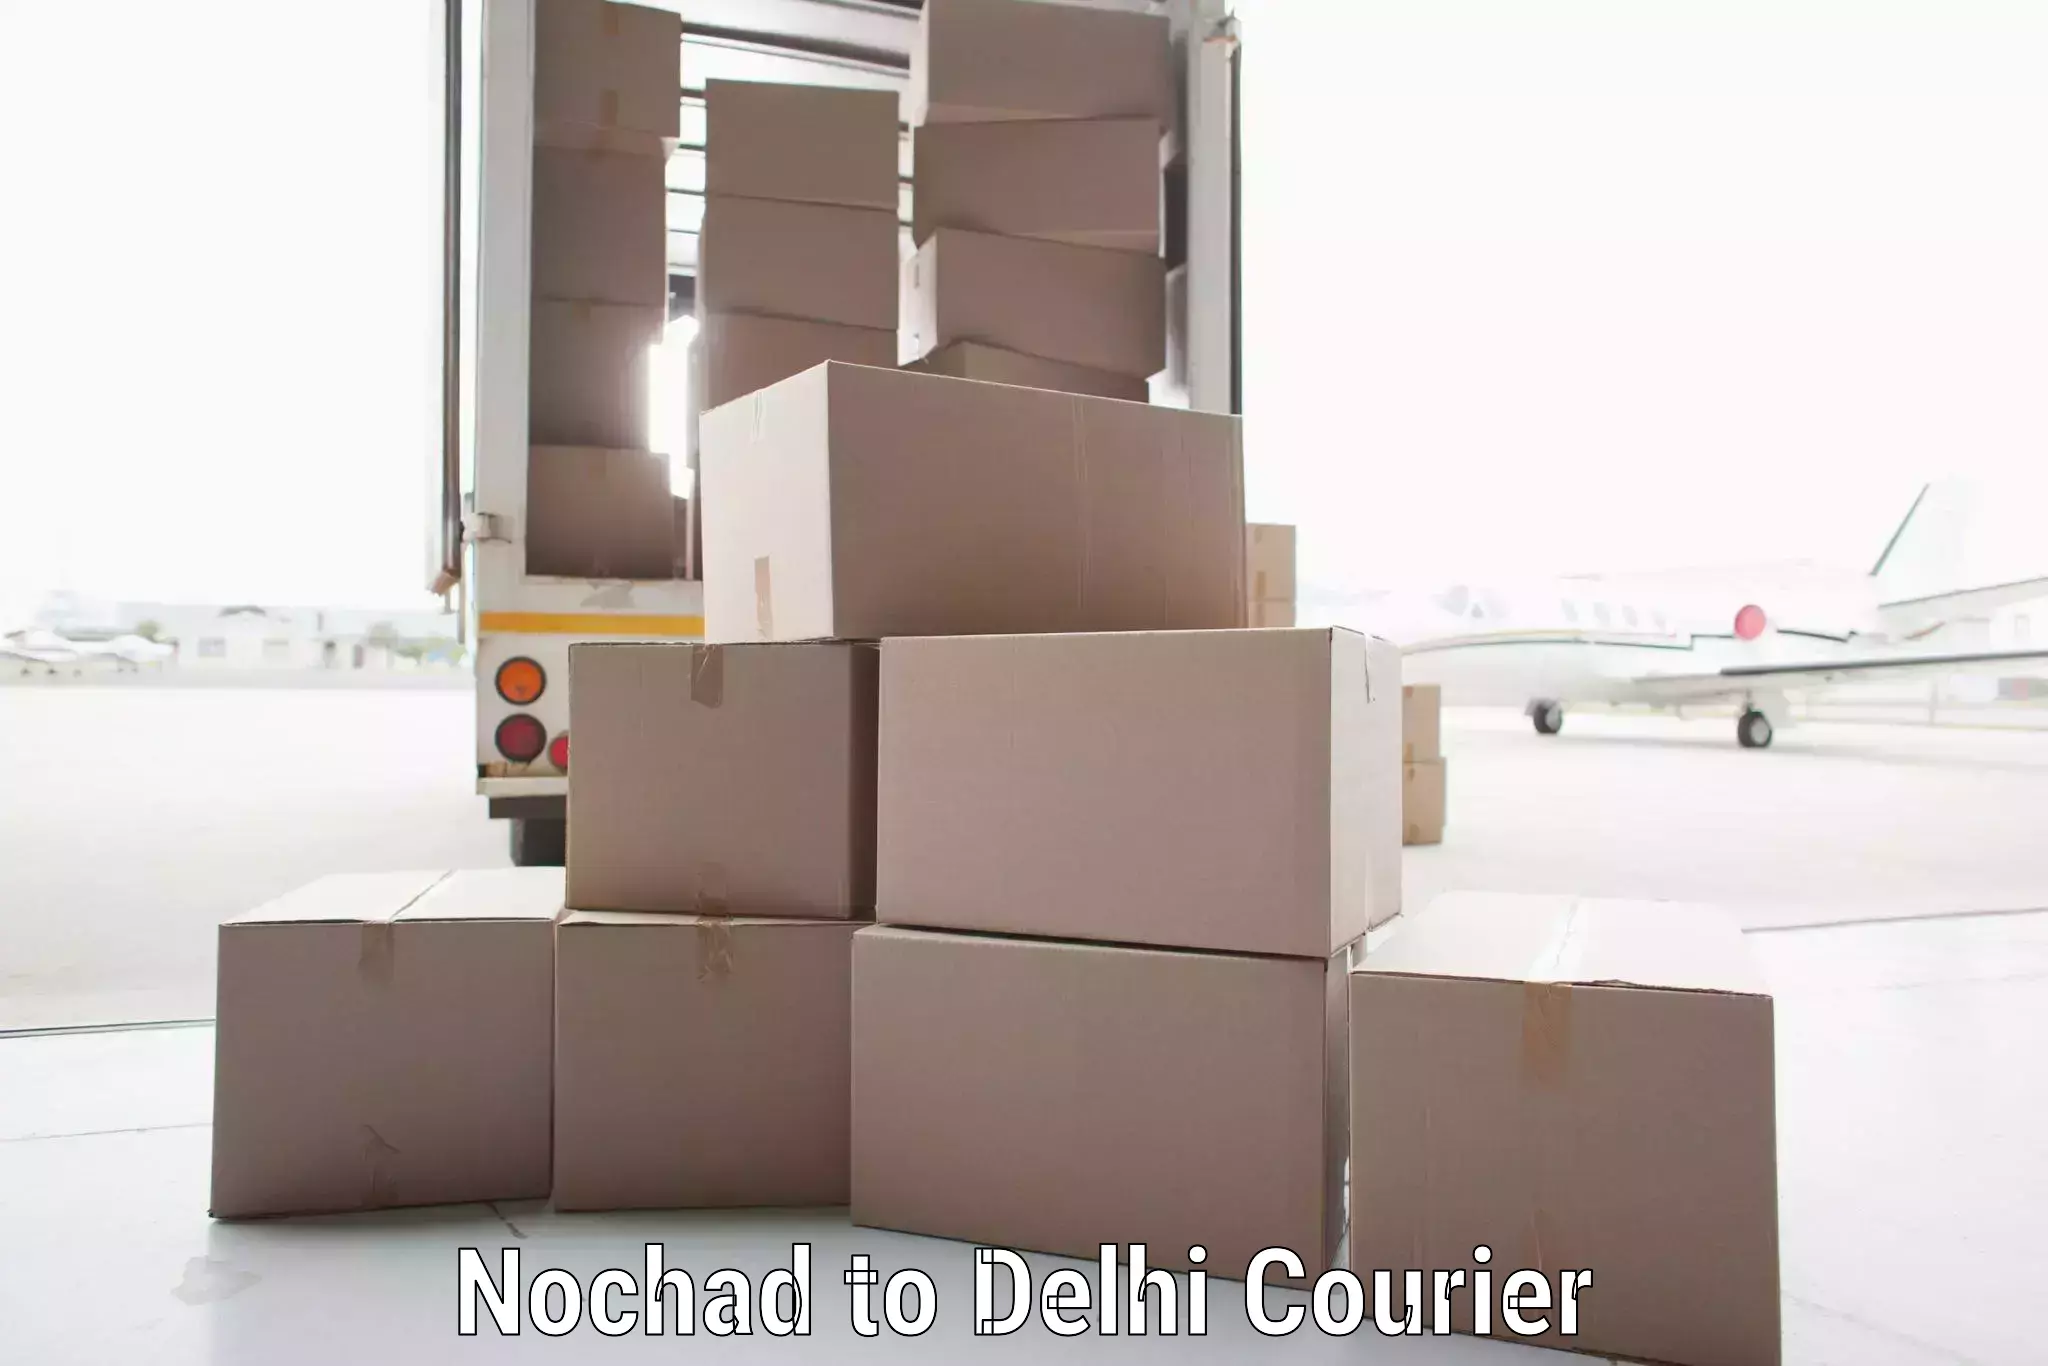 End-to-end delivery Nochad to Delhi